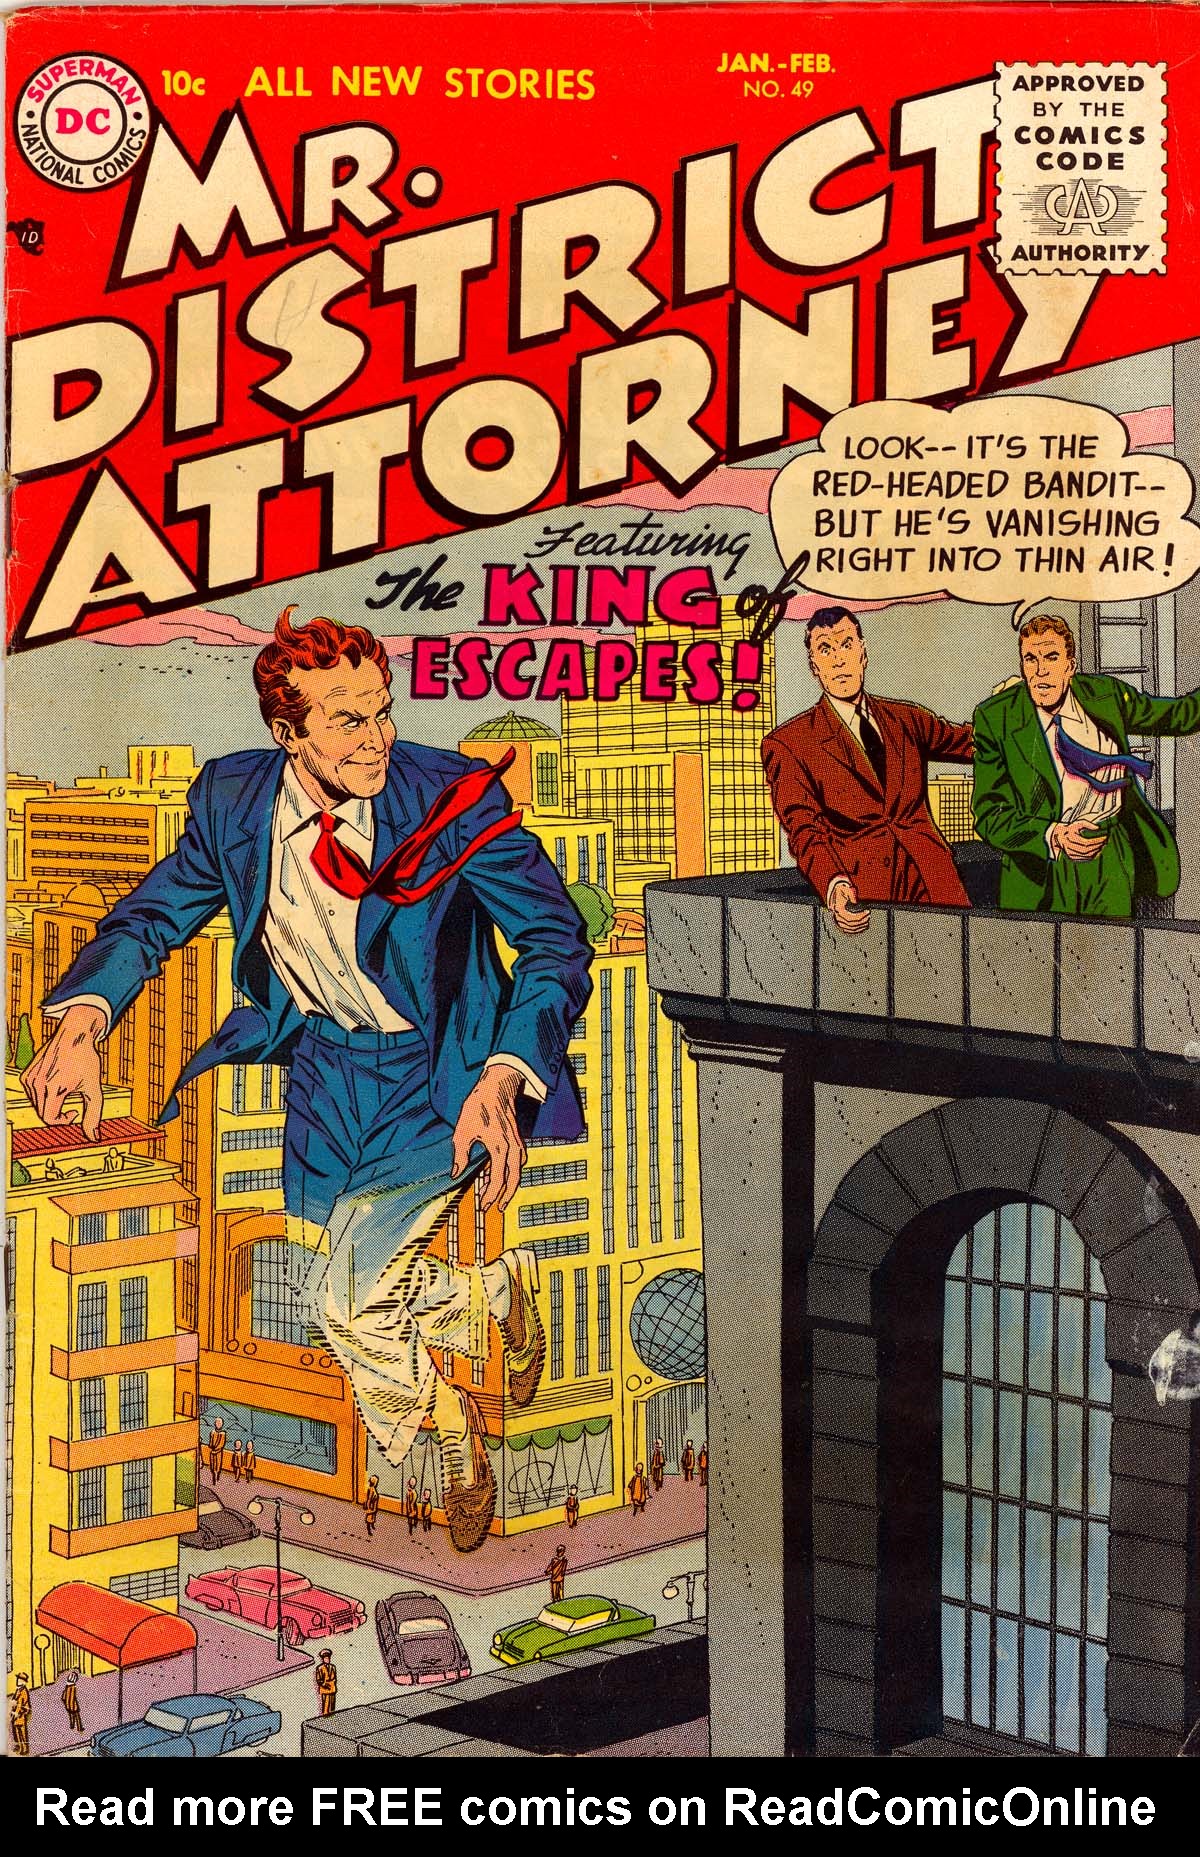 Read online Mr. District Attorney comic -  Issue #49 - 1